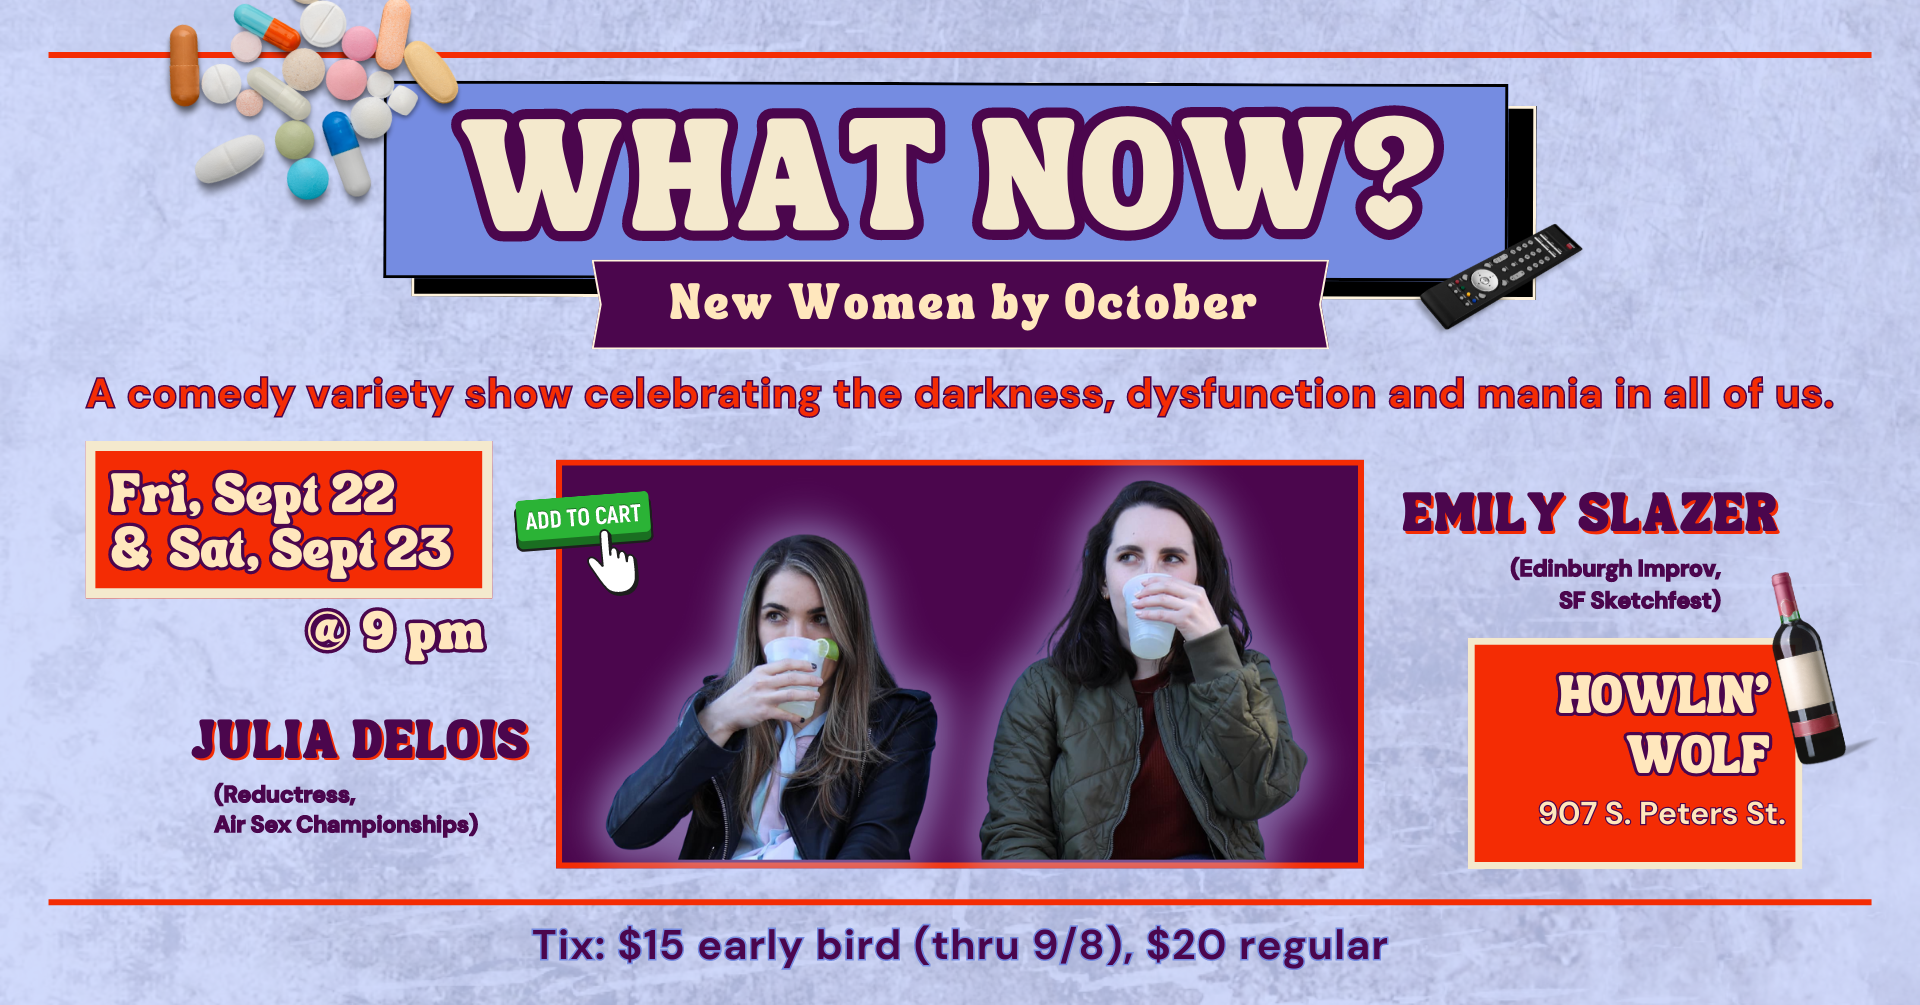 WHAT NOW? New Women by October New Orleans Local News and Events pic